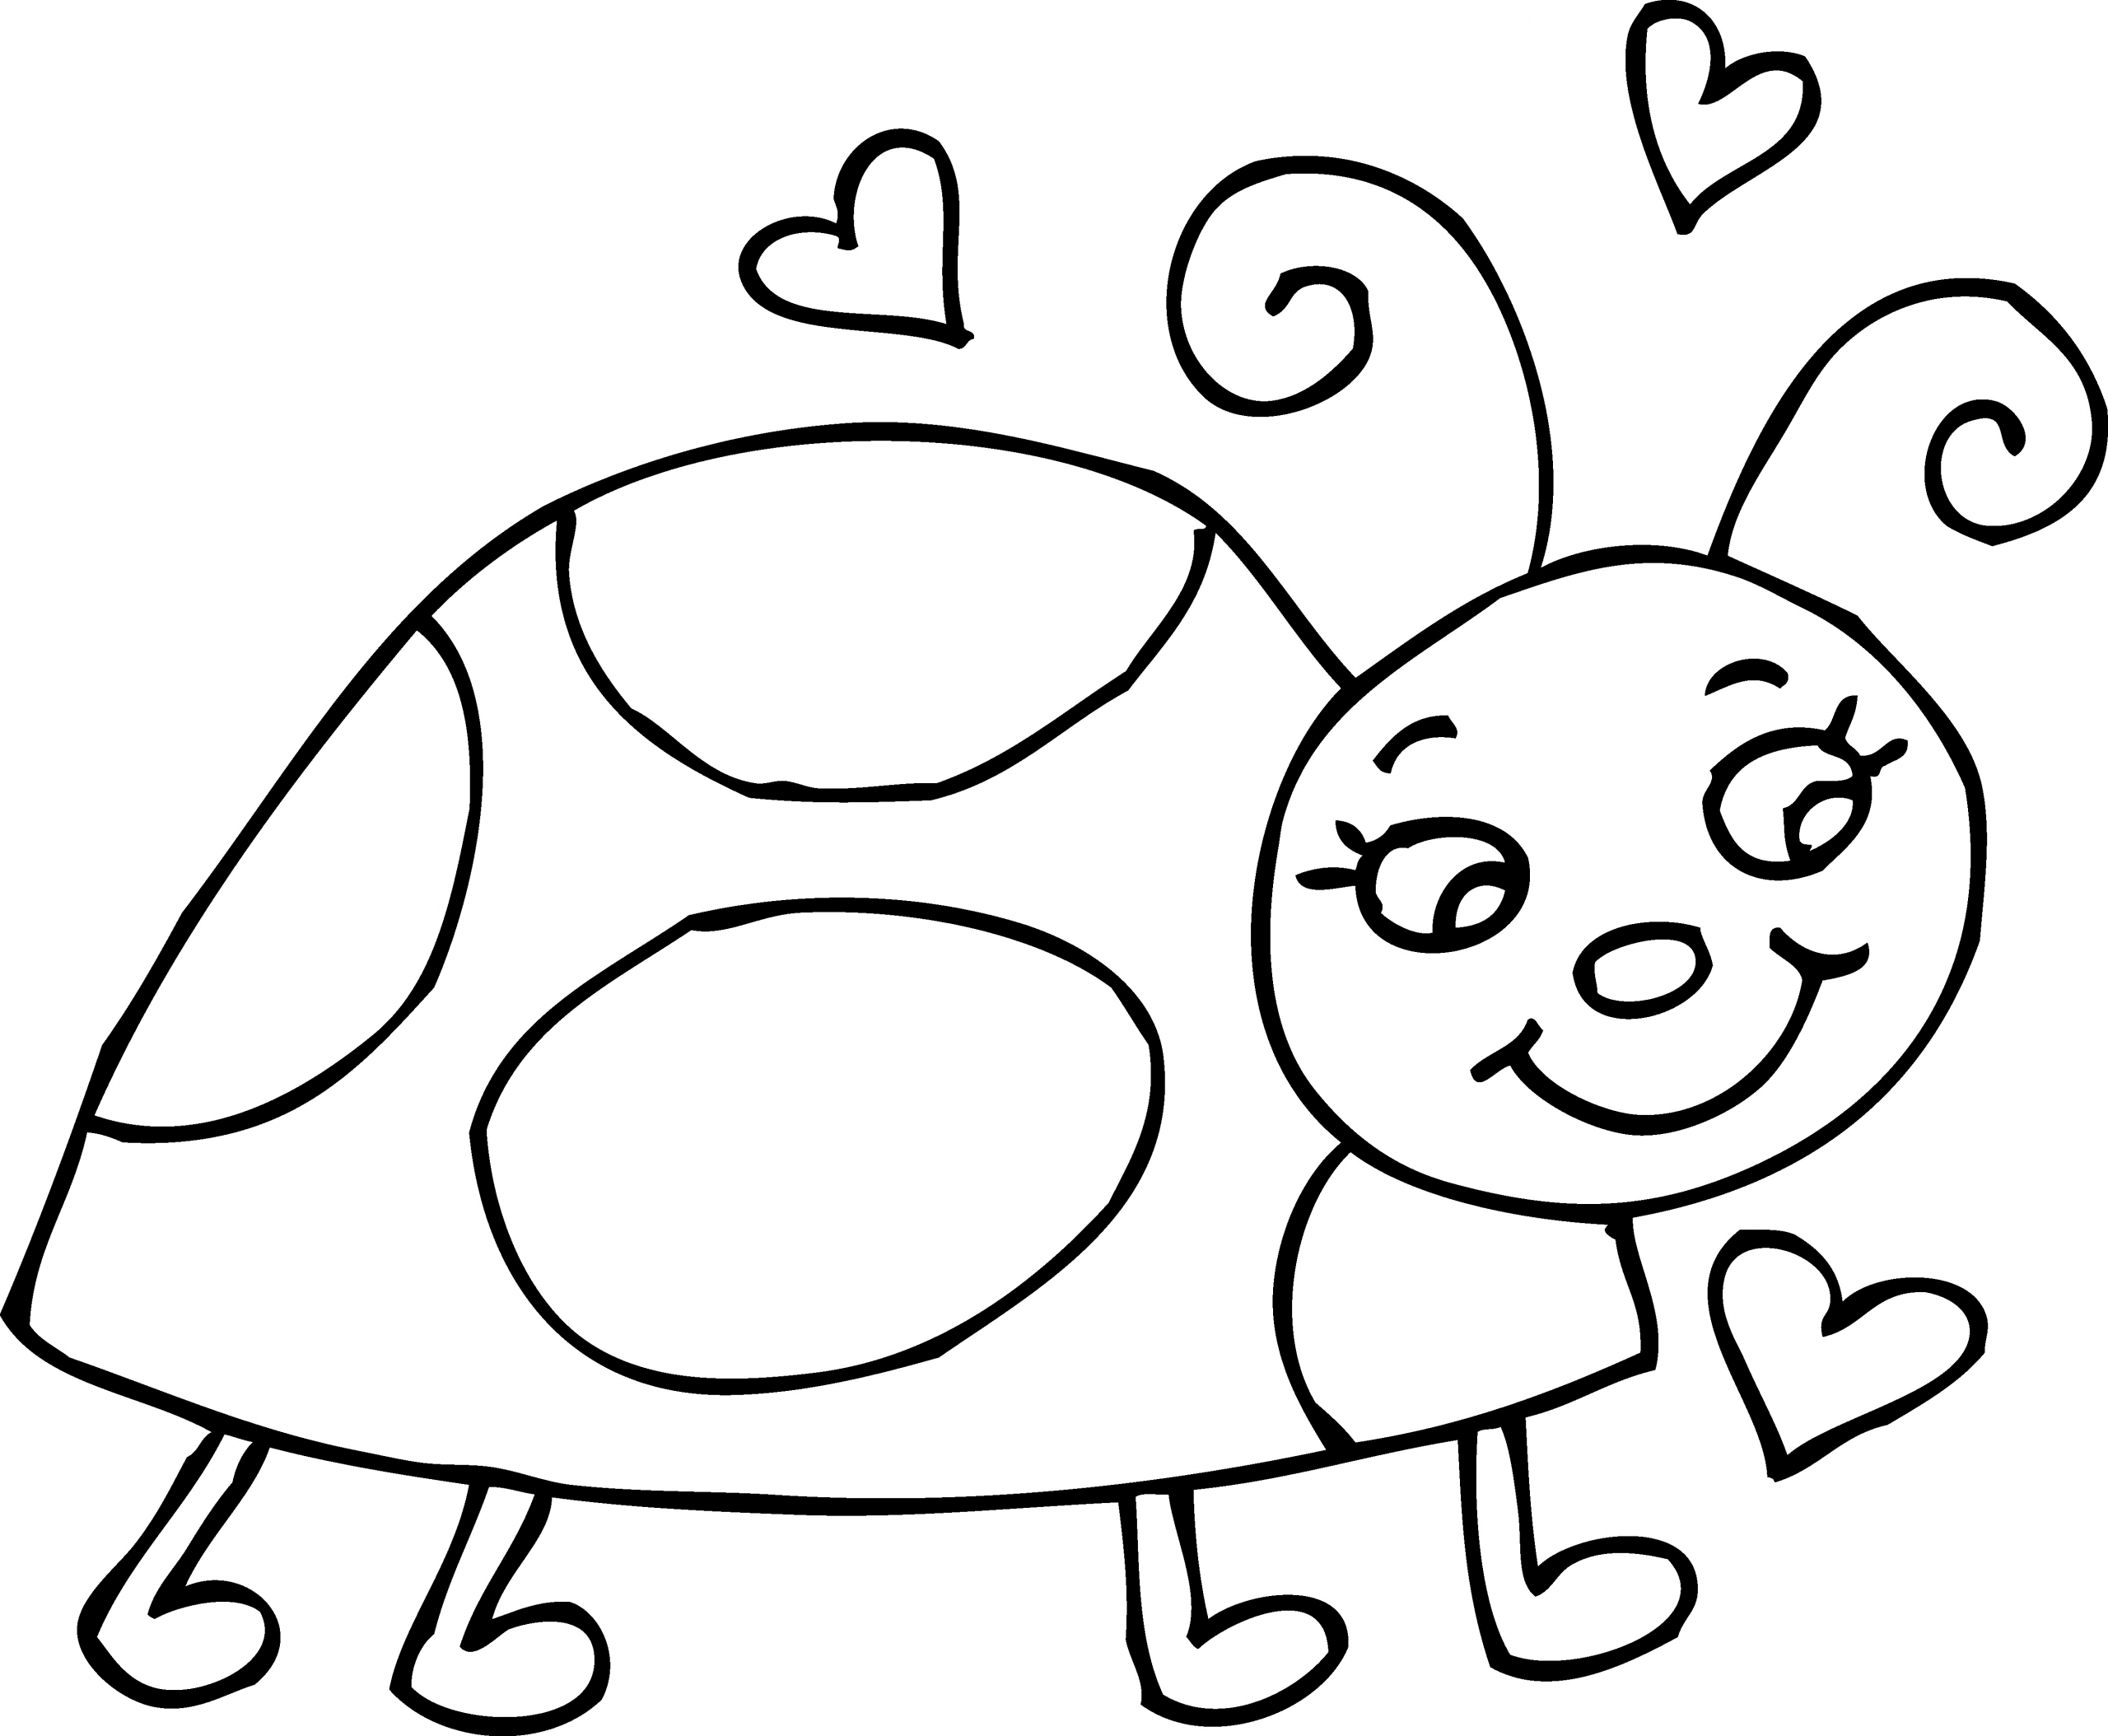 Ladybug Printable Coloring Pages
 Line Art of Cute Ladybug With Hearts Free Clip Art